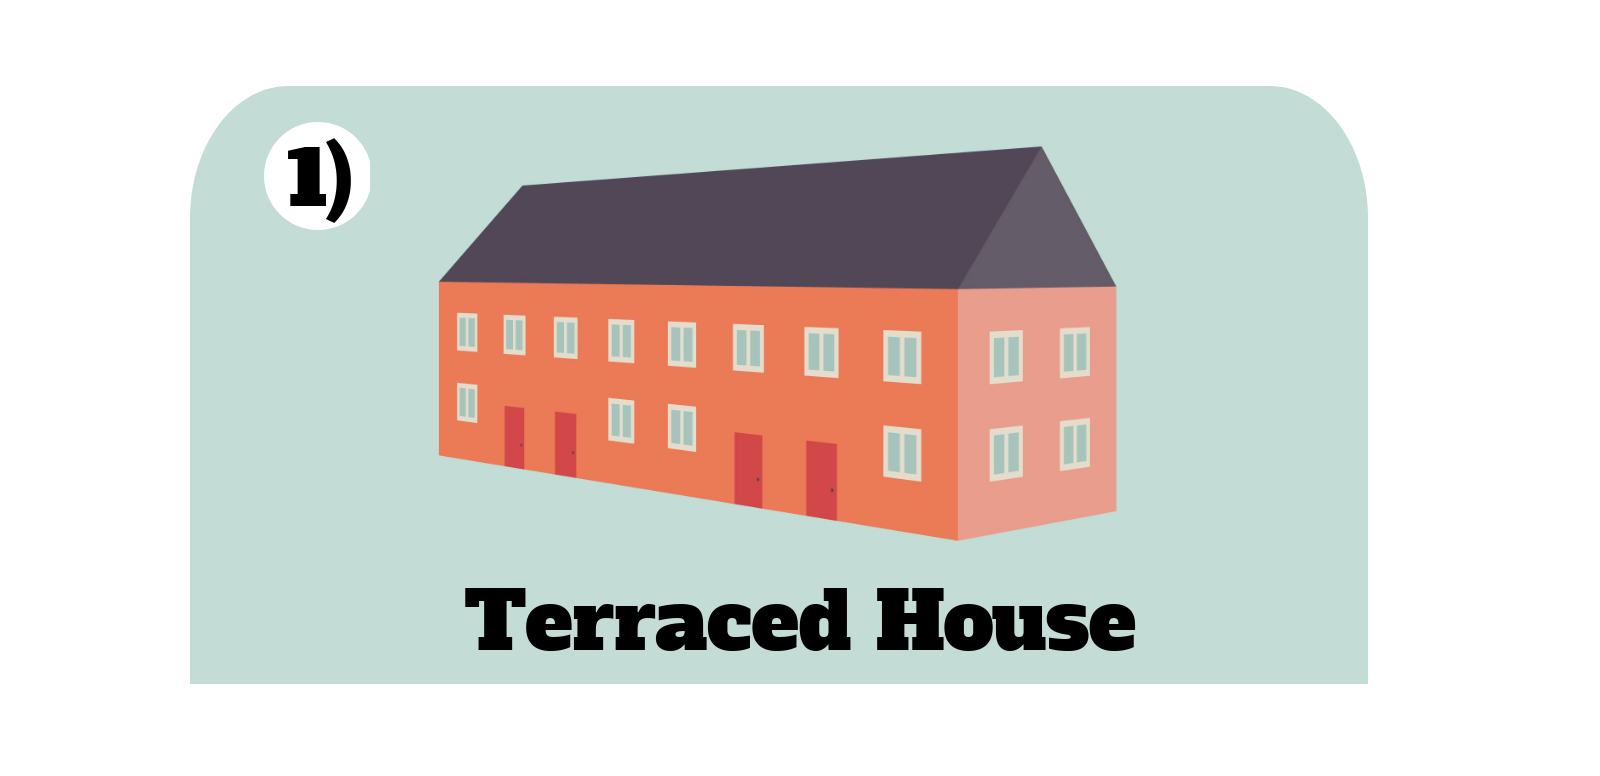 A typical terraced type of house